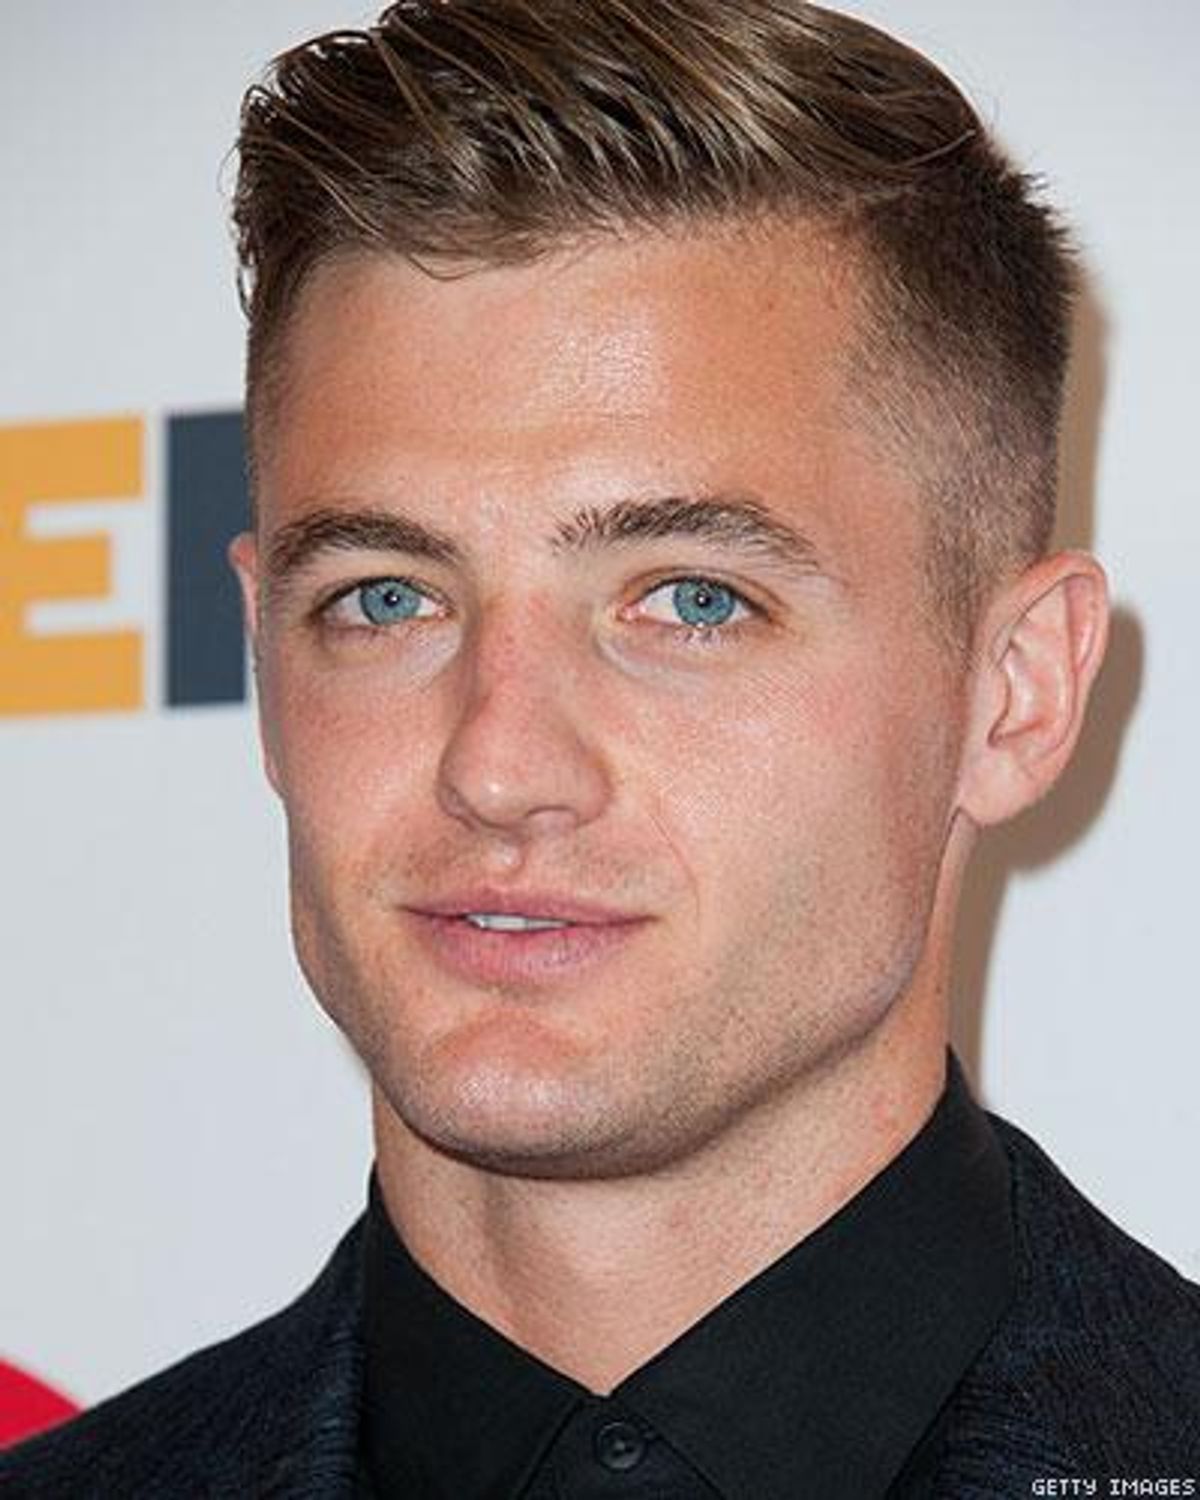 Soccer: Robbie Rogers Will Stay in Los Angeles